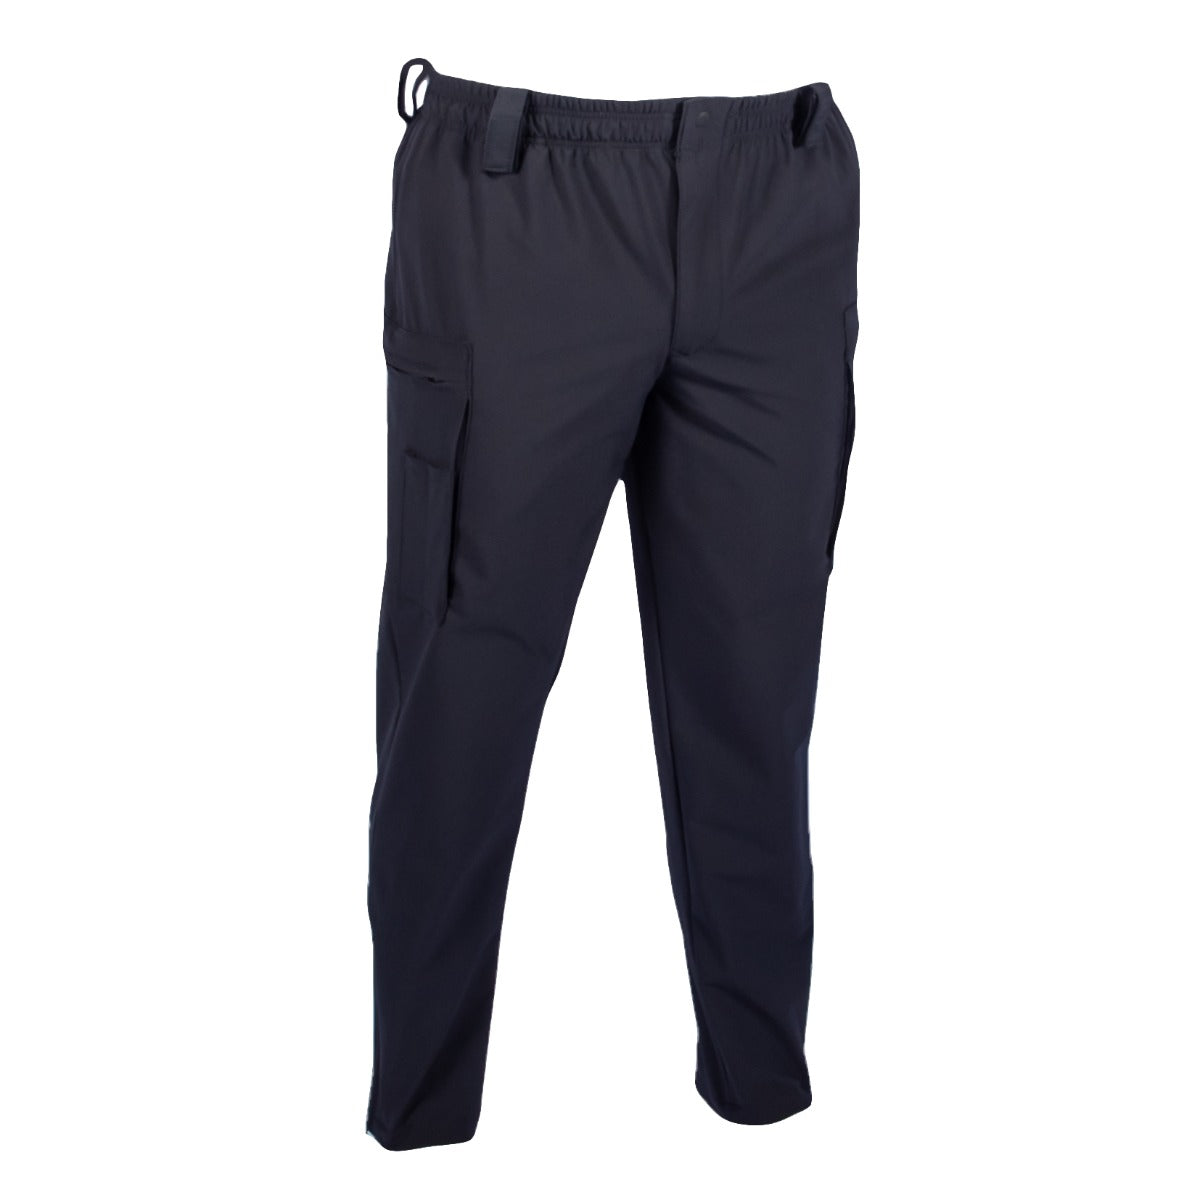 Extreme Stretch Lightweight Pants